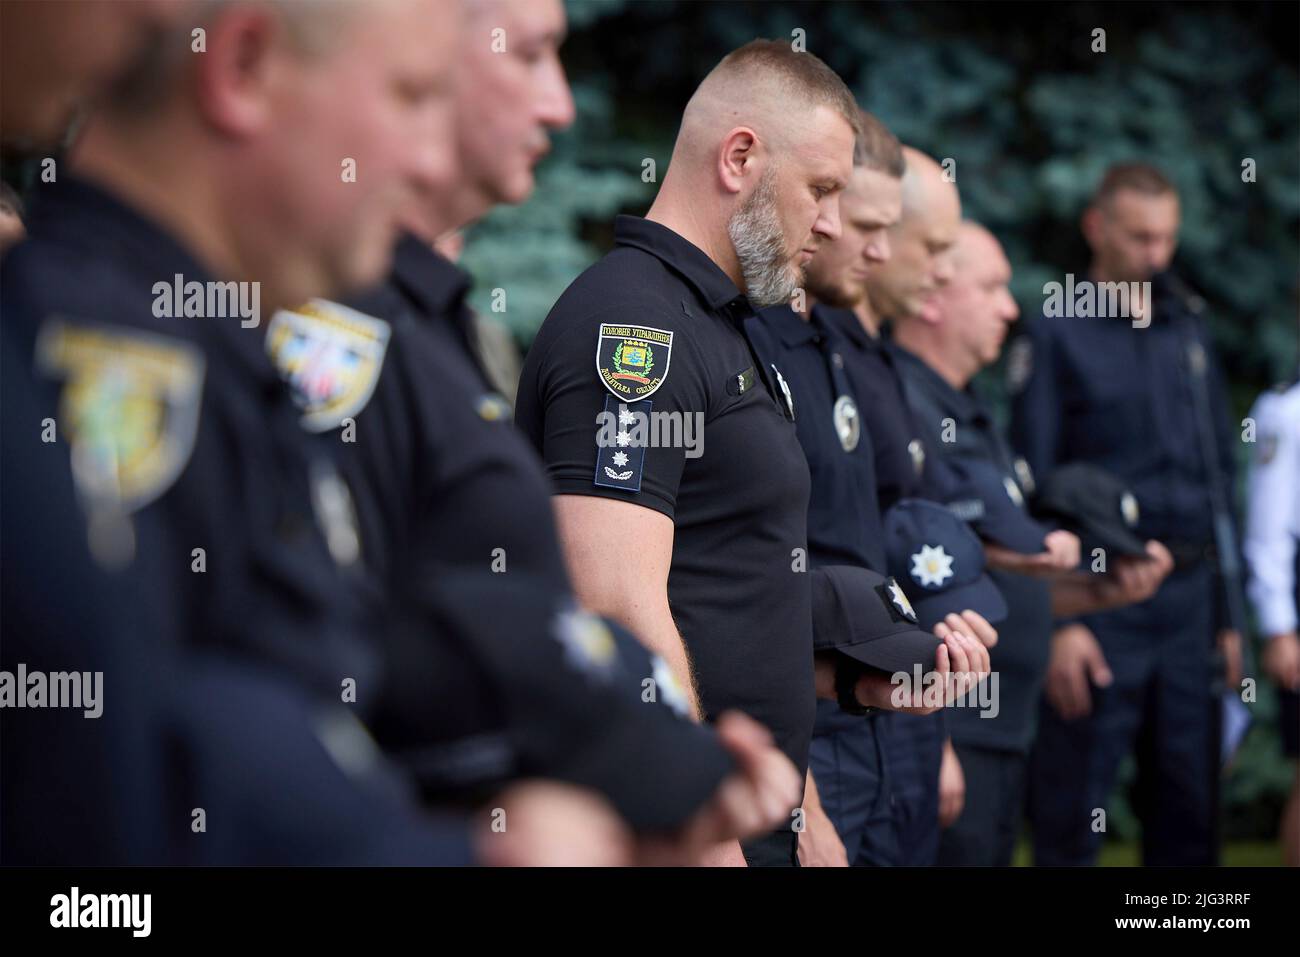 Kyiv, Ukraine. 04 July, 2022. Ukrainian National Police stand for a moment of silence during an event celebrating the 7th anniversary of the national police force hosted by President Volodymyr Zelenskyy,, July 4, 2022 in Kyiv, Ukraine.  Credit: Ukraine Presidency/Ukrainian Presidential Press Office/Alamy Live News Stock Photo